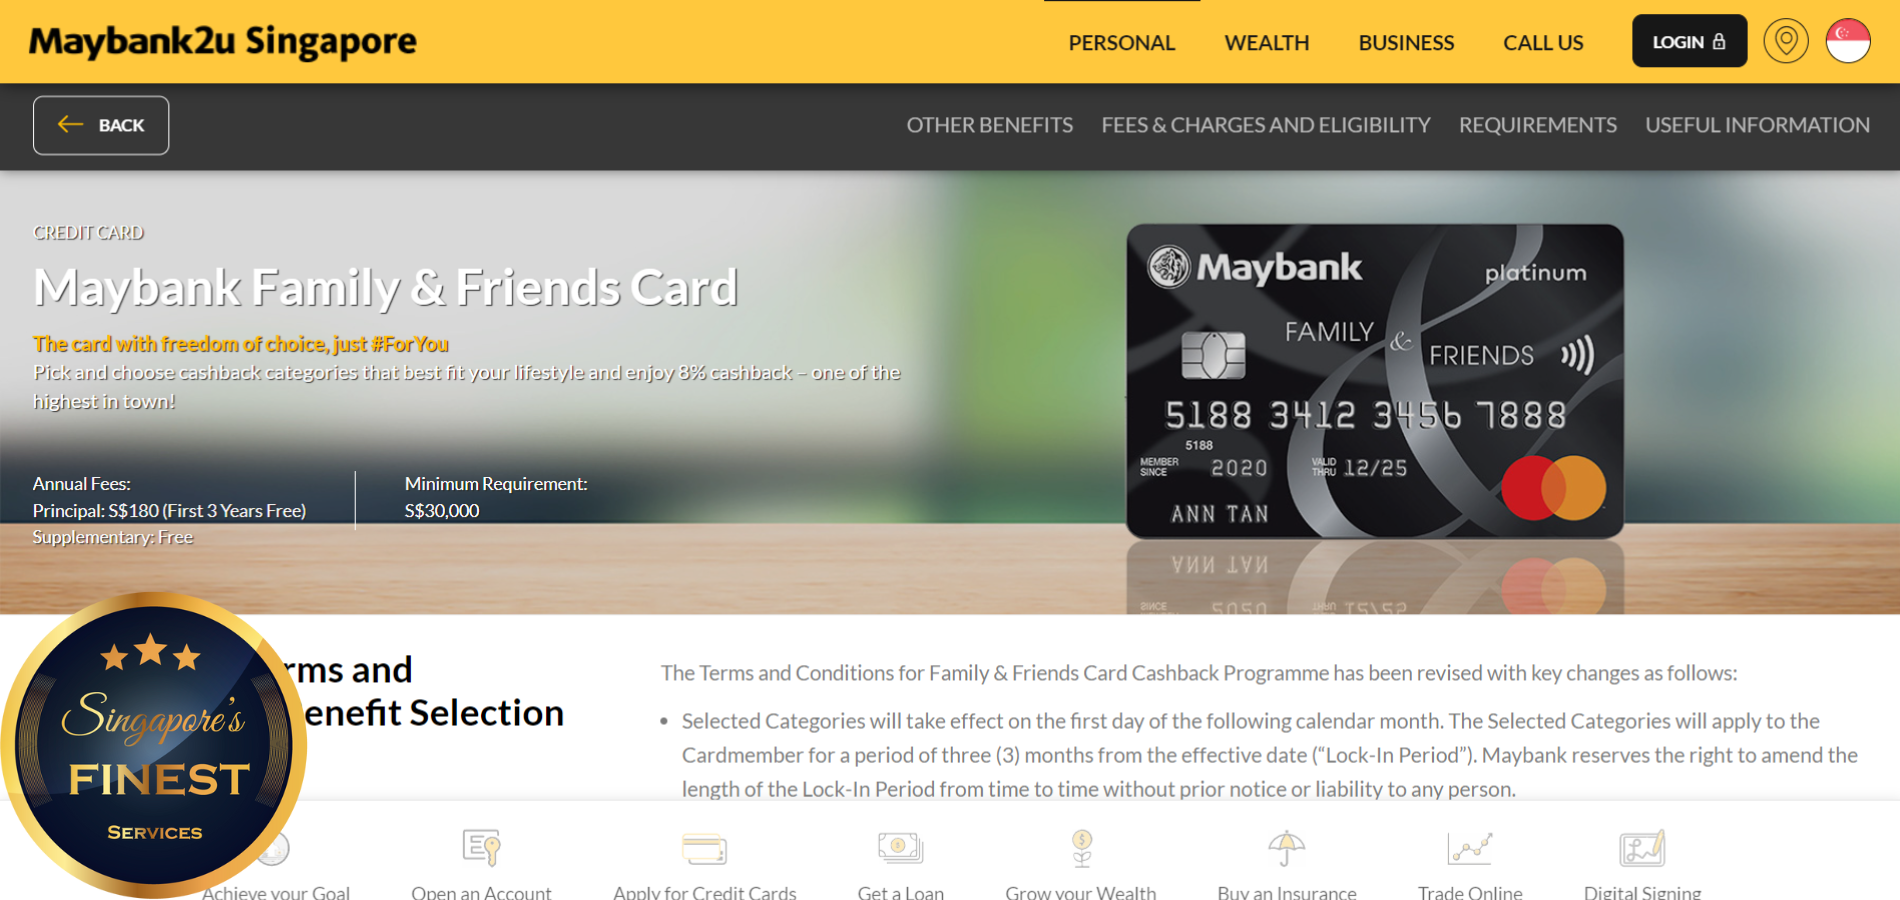 The Finest Credit Cards in Singapore